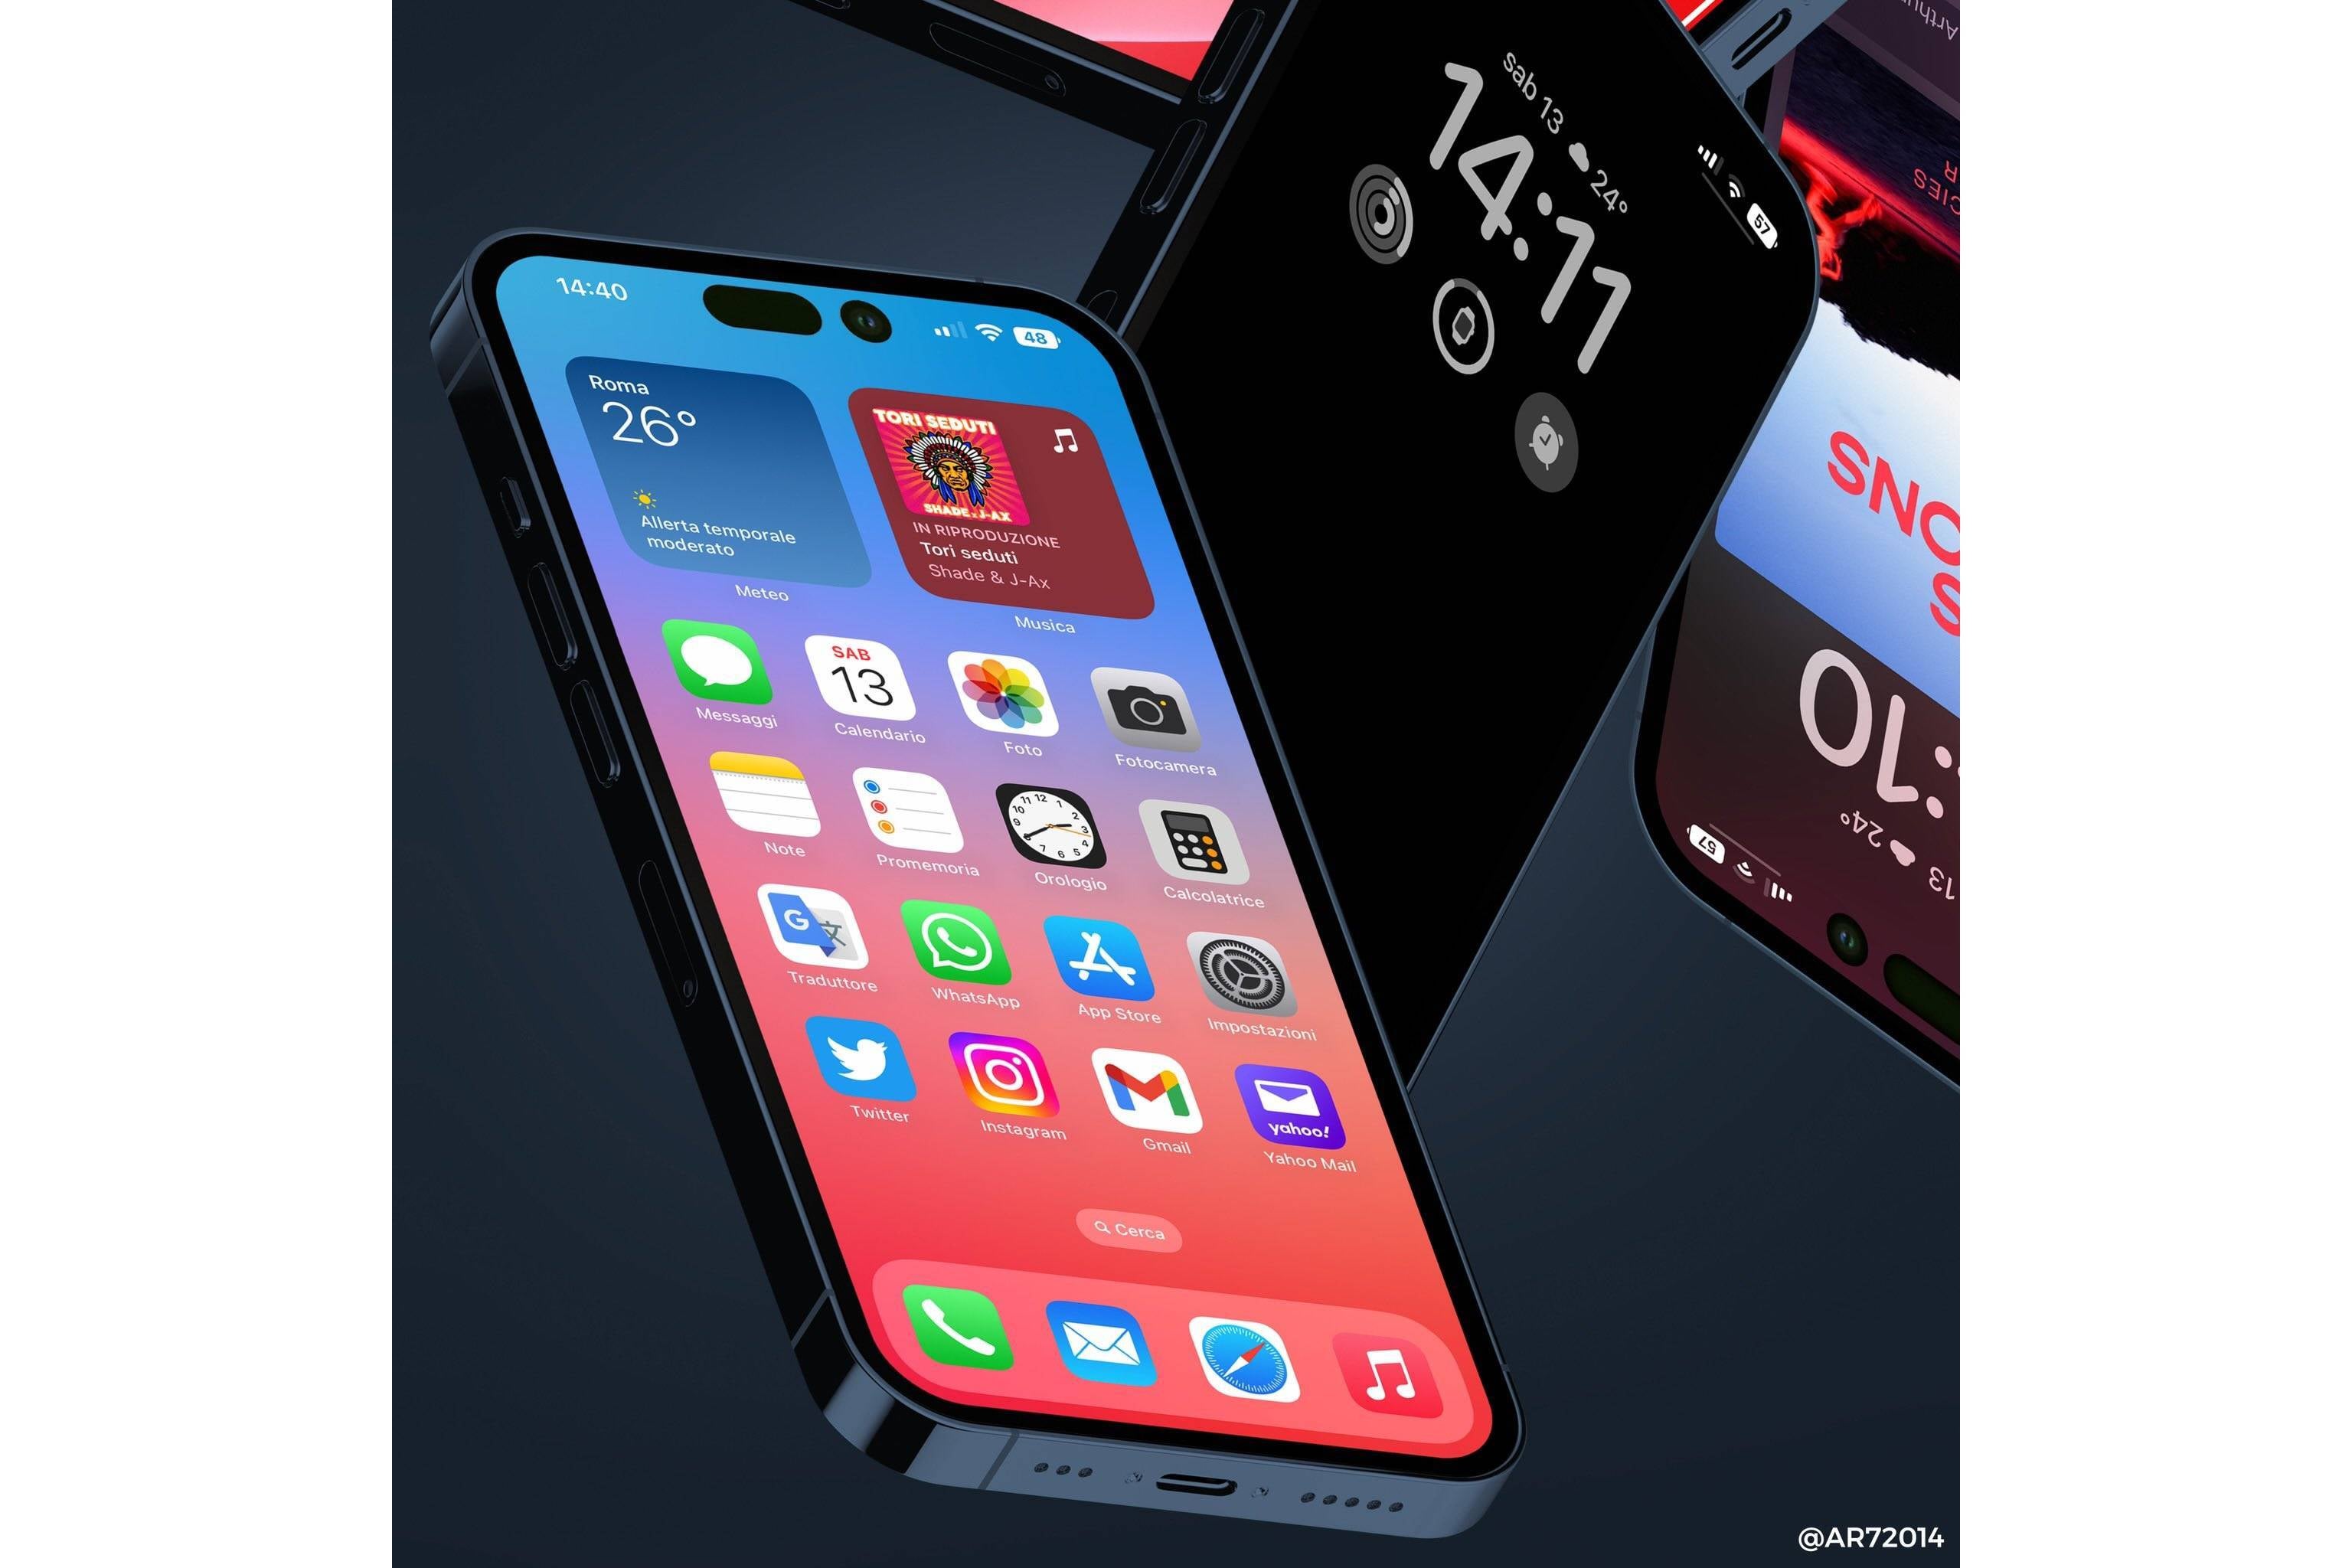 iPhone 14 Pro Renders Based on Rumors - Stunning Concepts Envision iPhone 14 Pro Running iOS 16